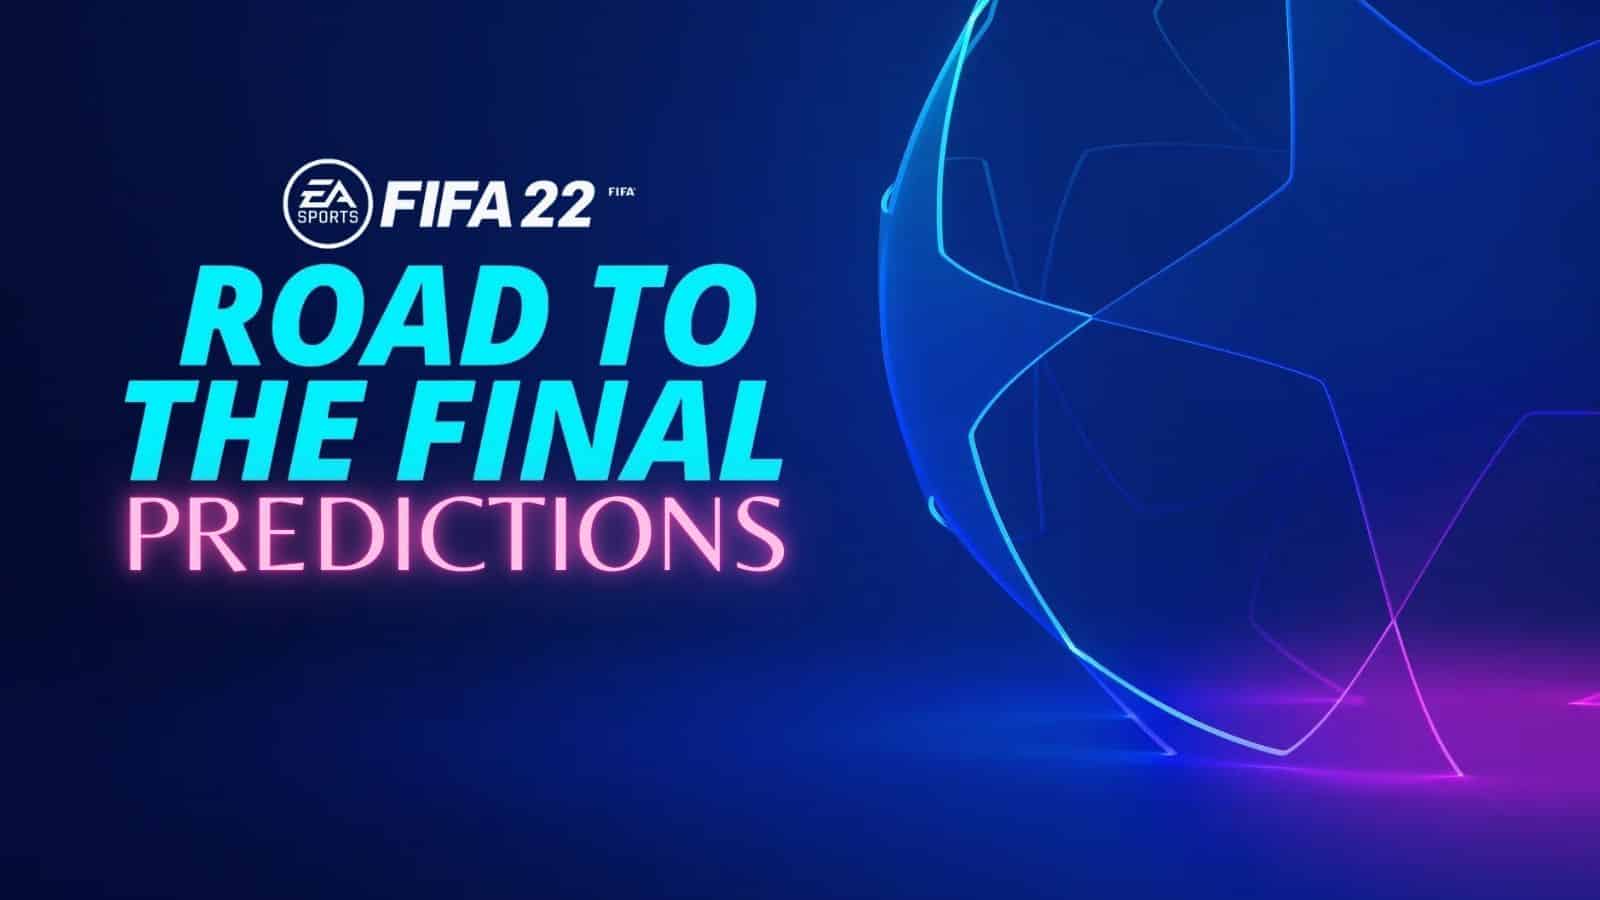 FIFA 22 Road to the Final predictions